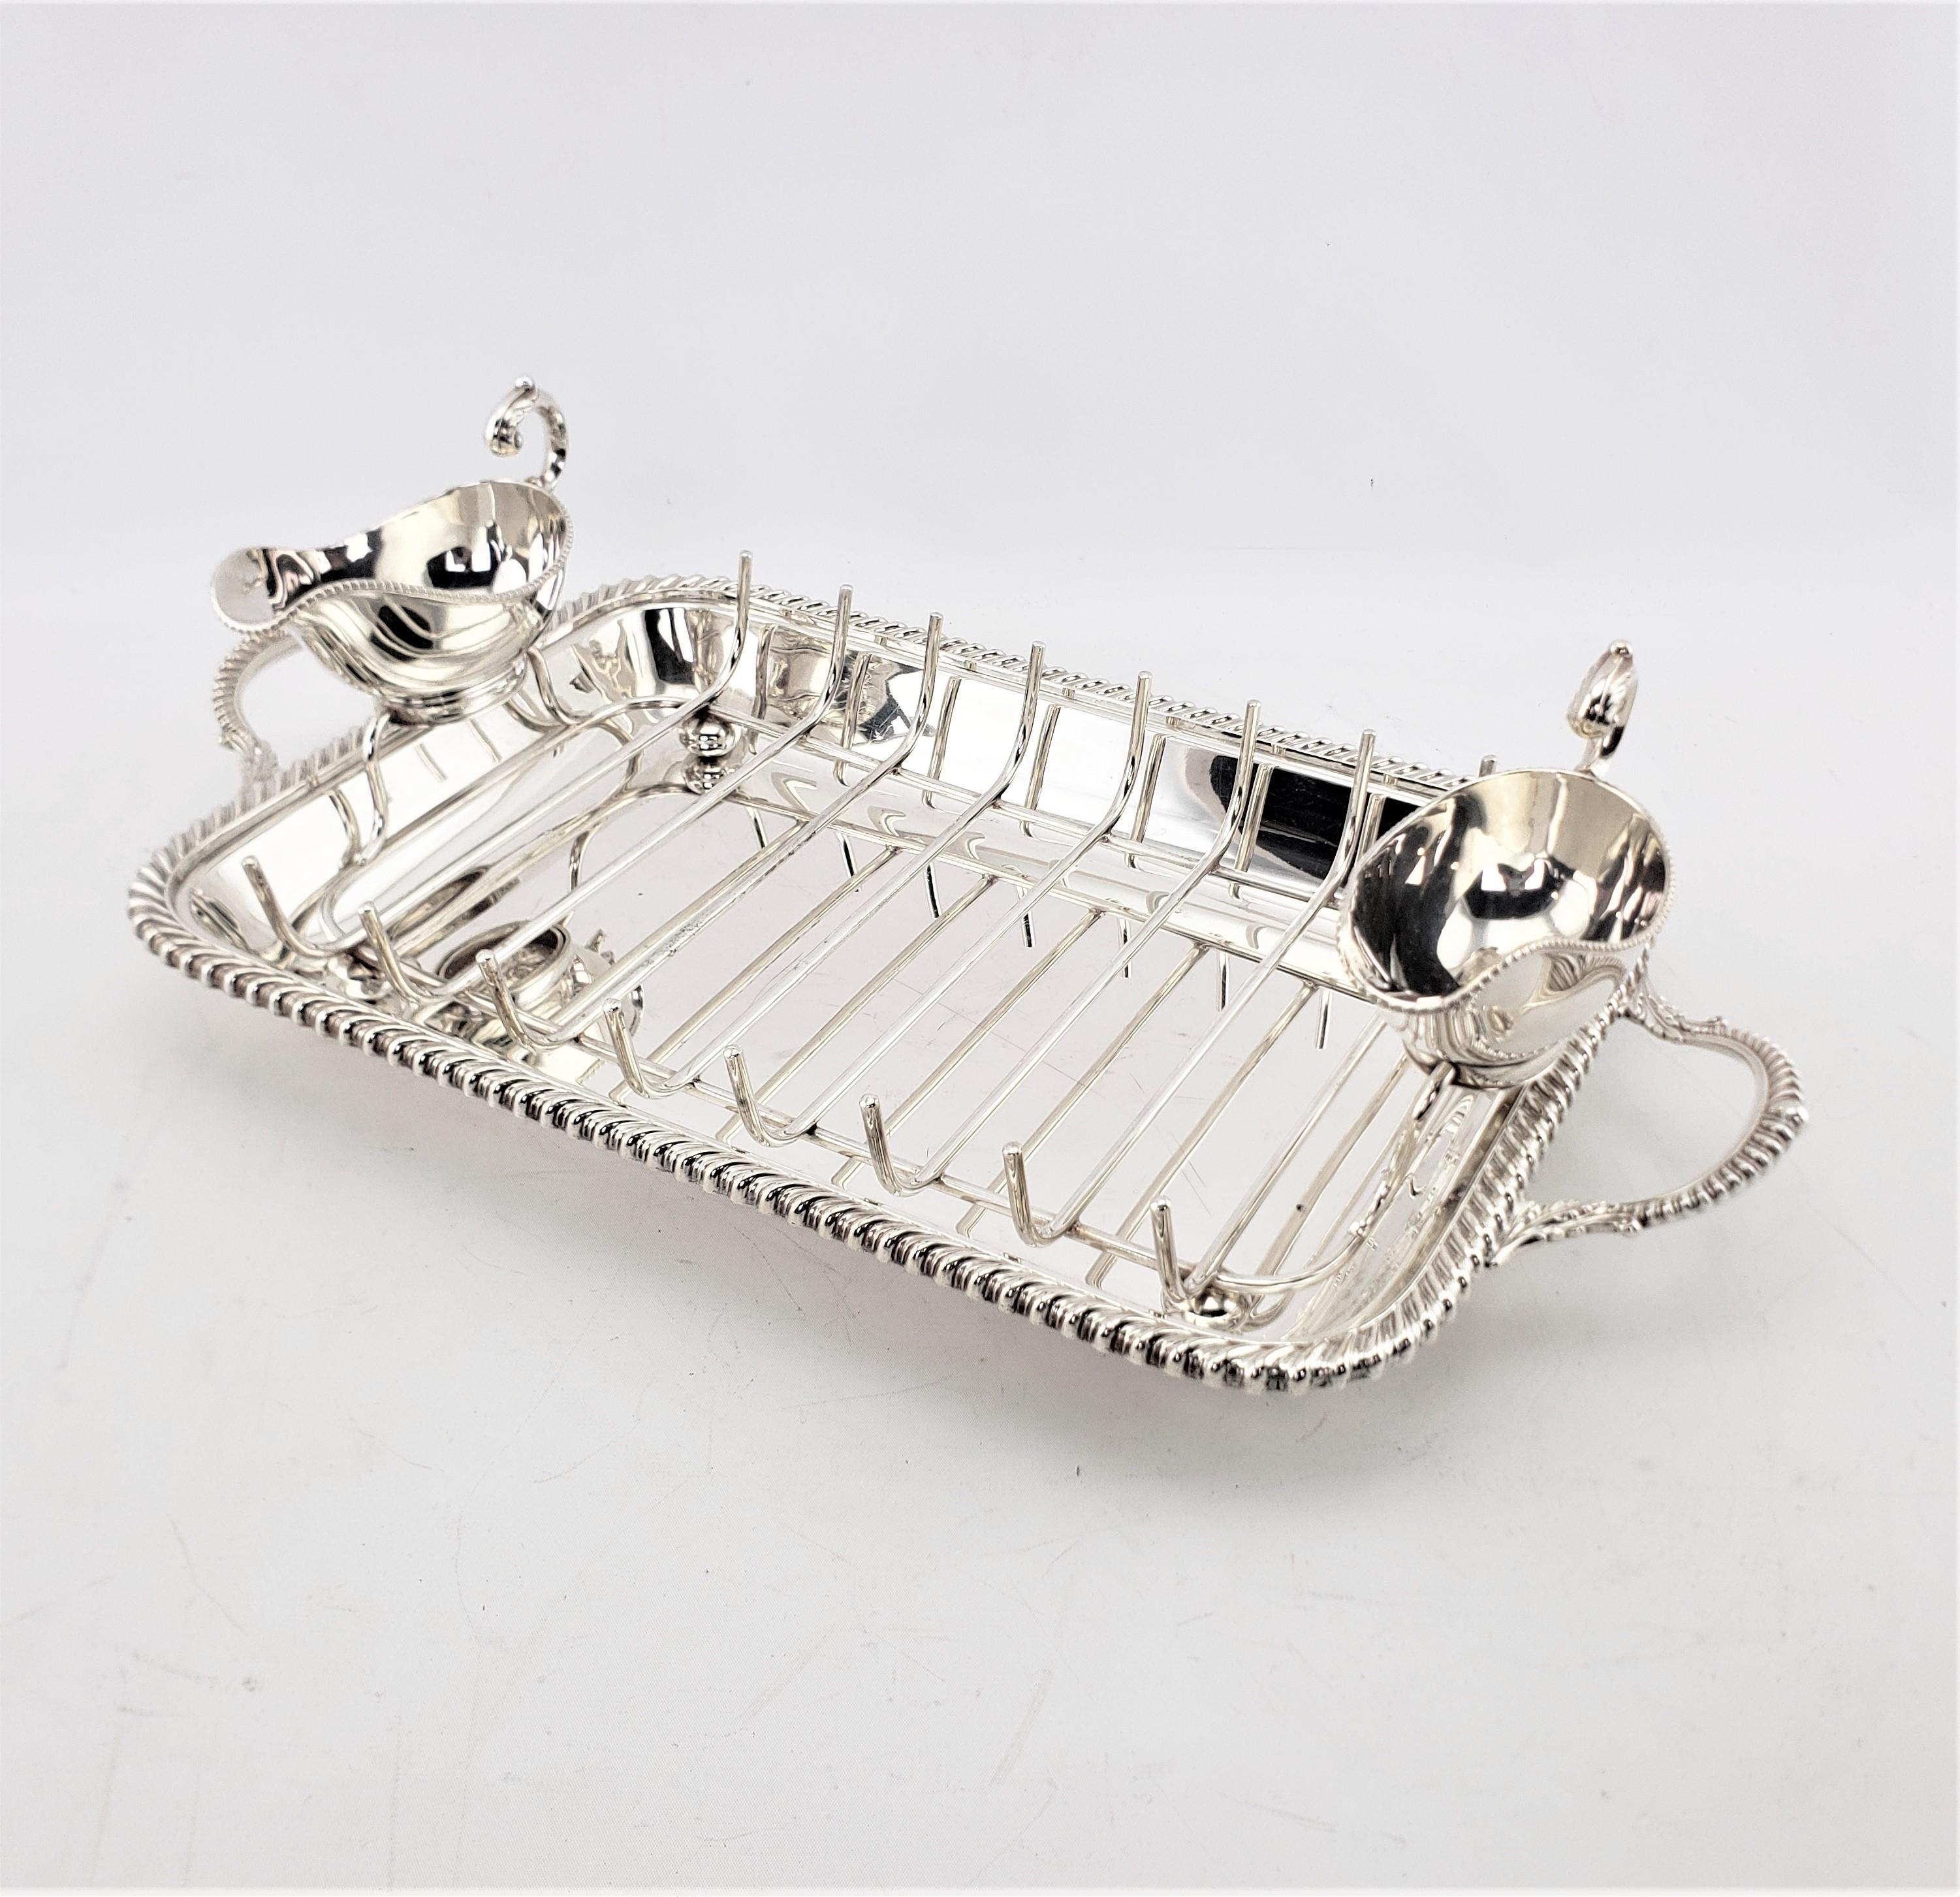 Antique Birks Silver Plated Asparagus Server Set with Rope Accent Decoration In Good Condition For Sale In Hamilton, Ontario